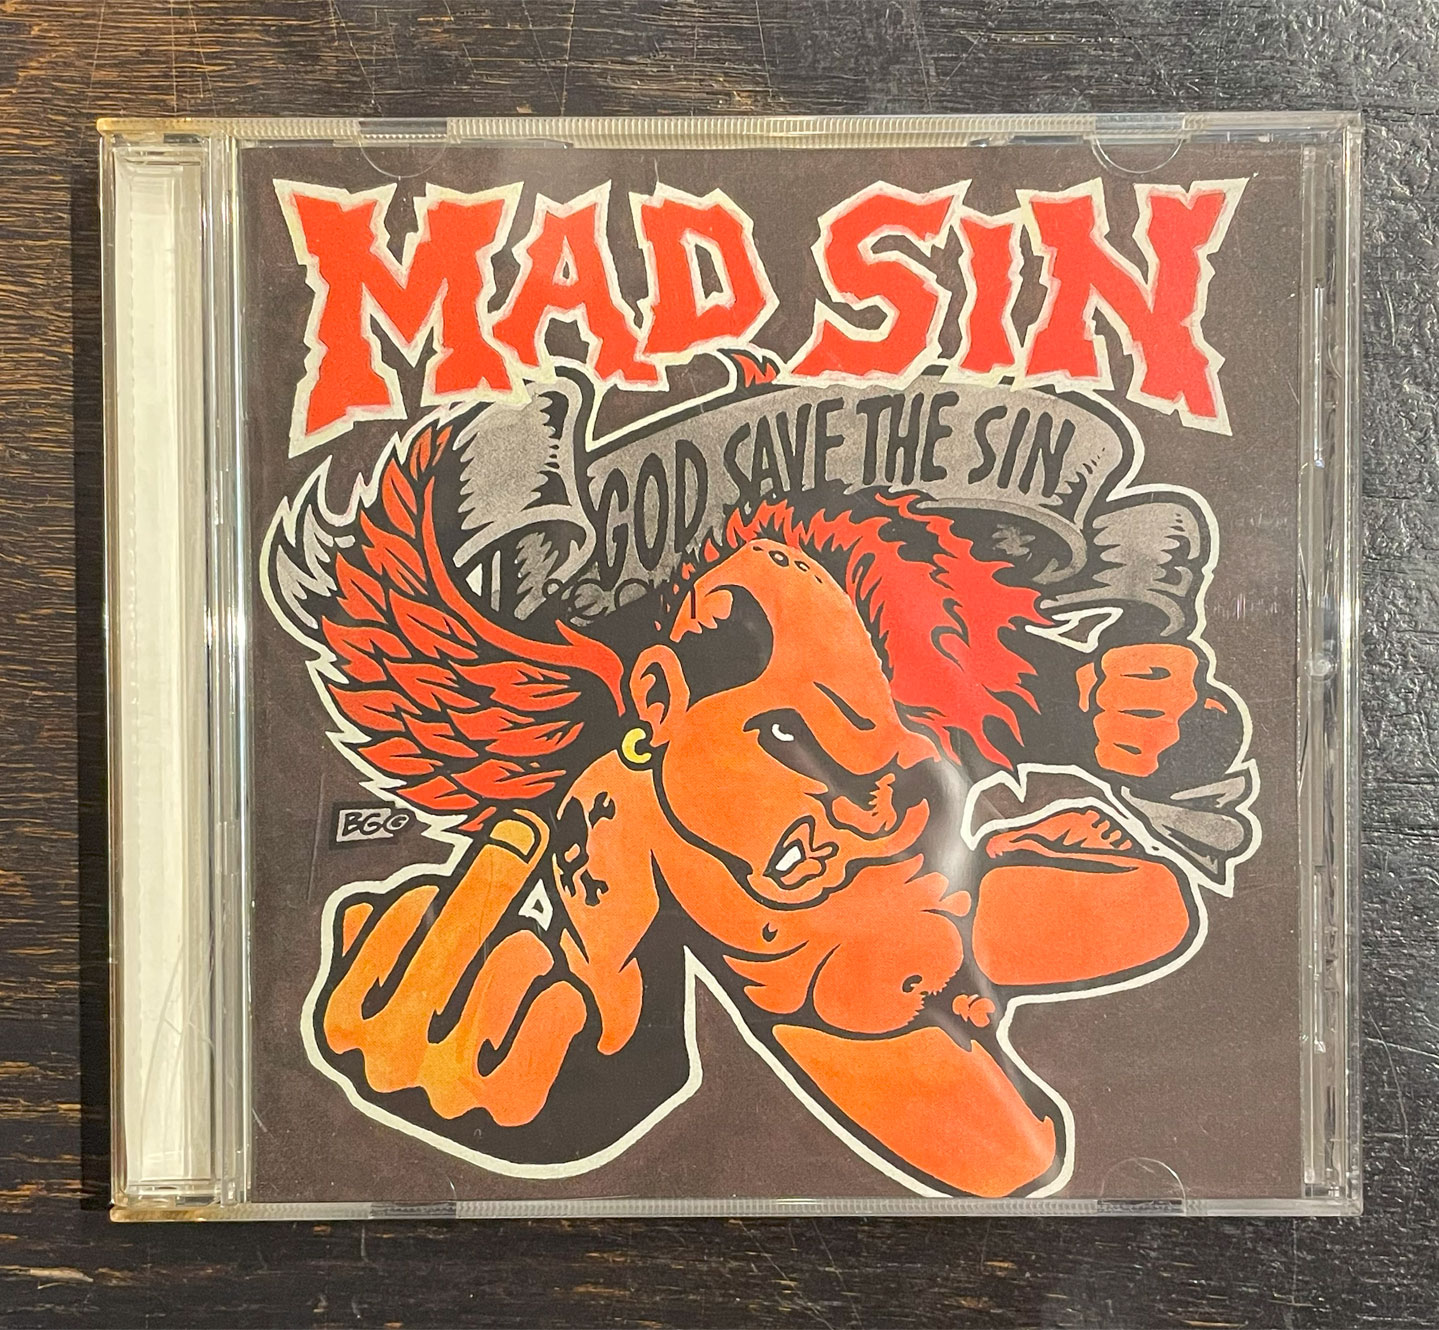 USED! MAD SIN CD God Save The Sin